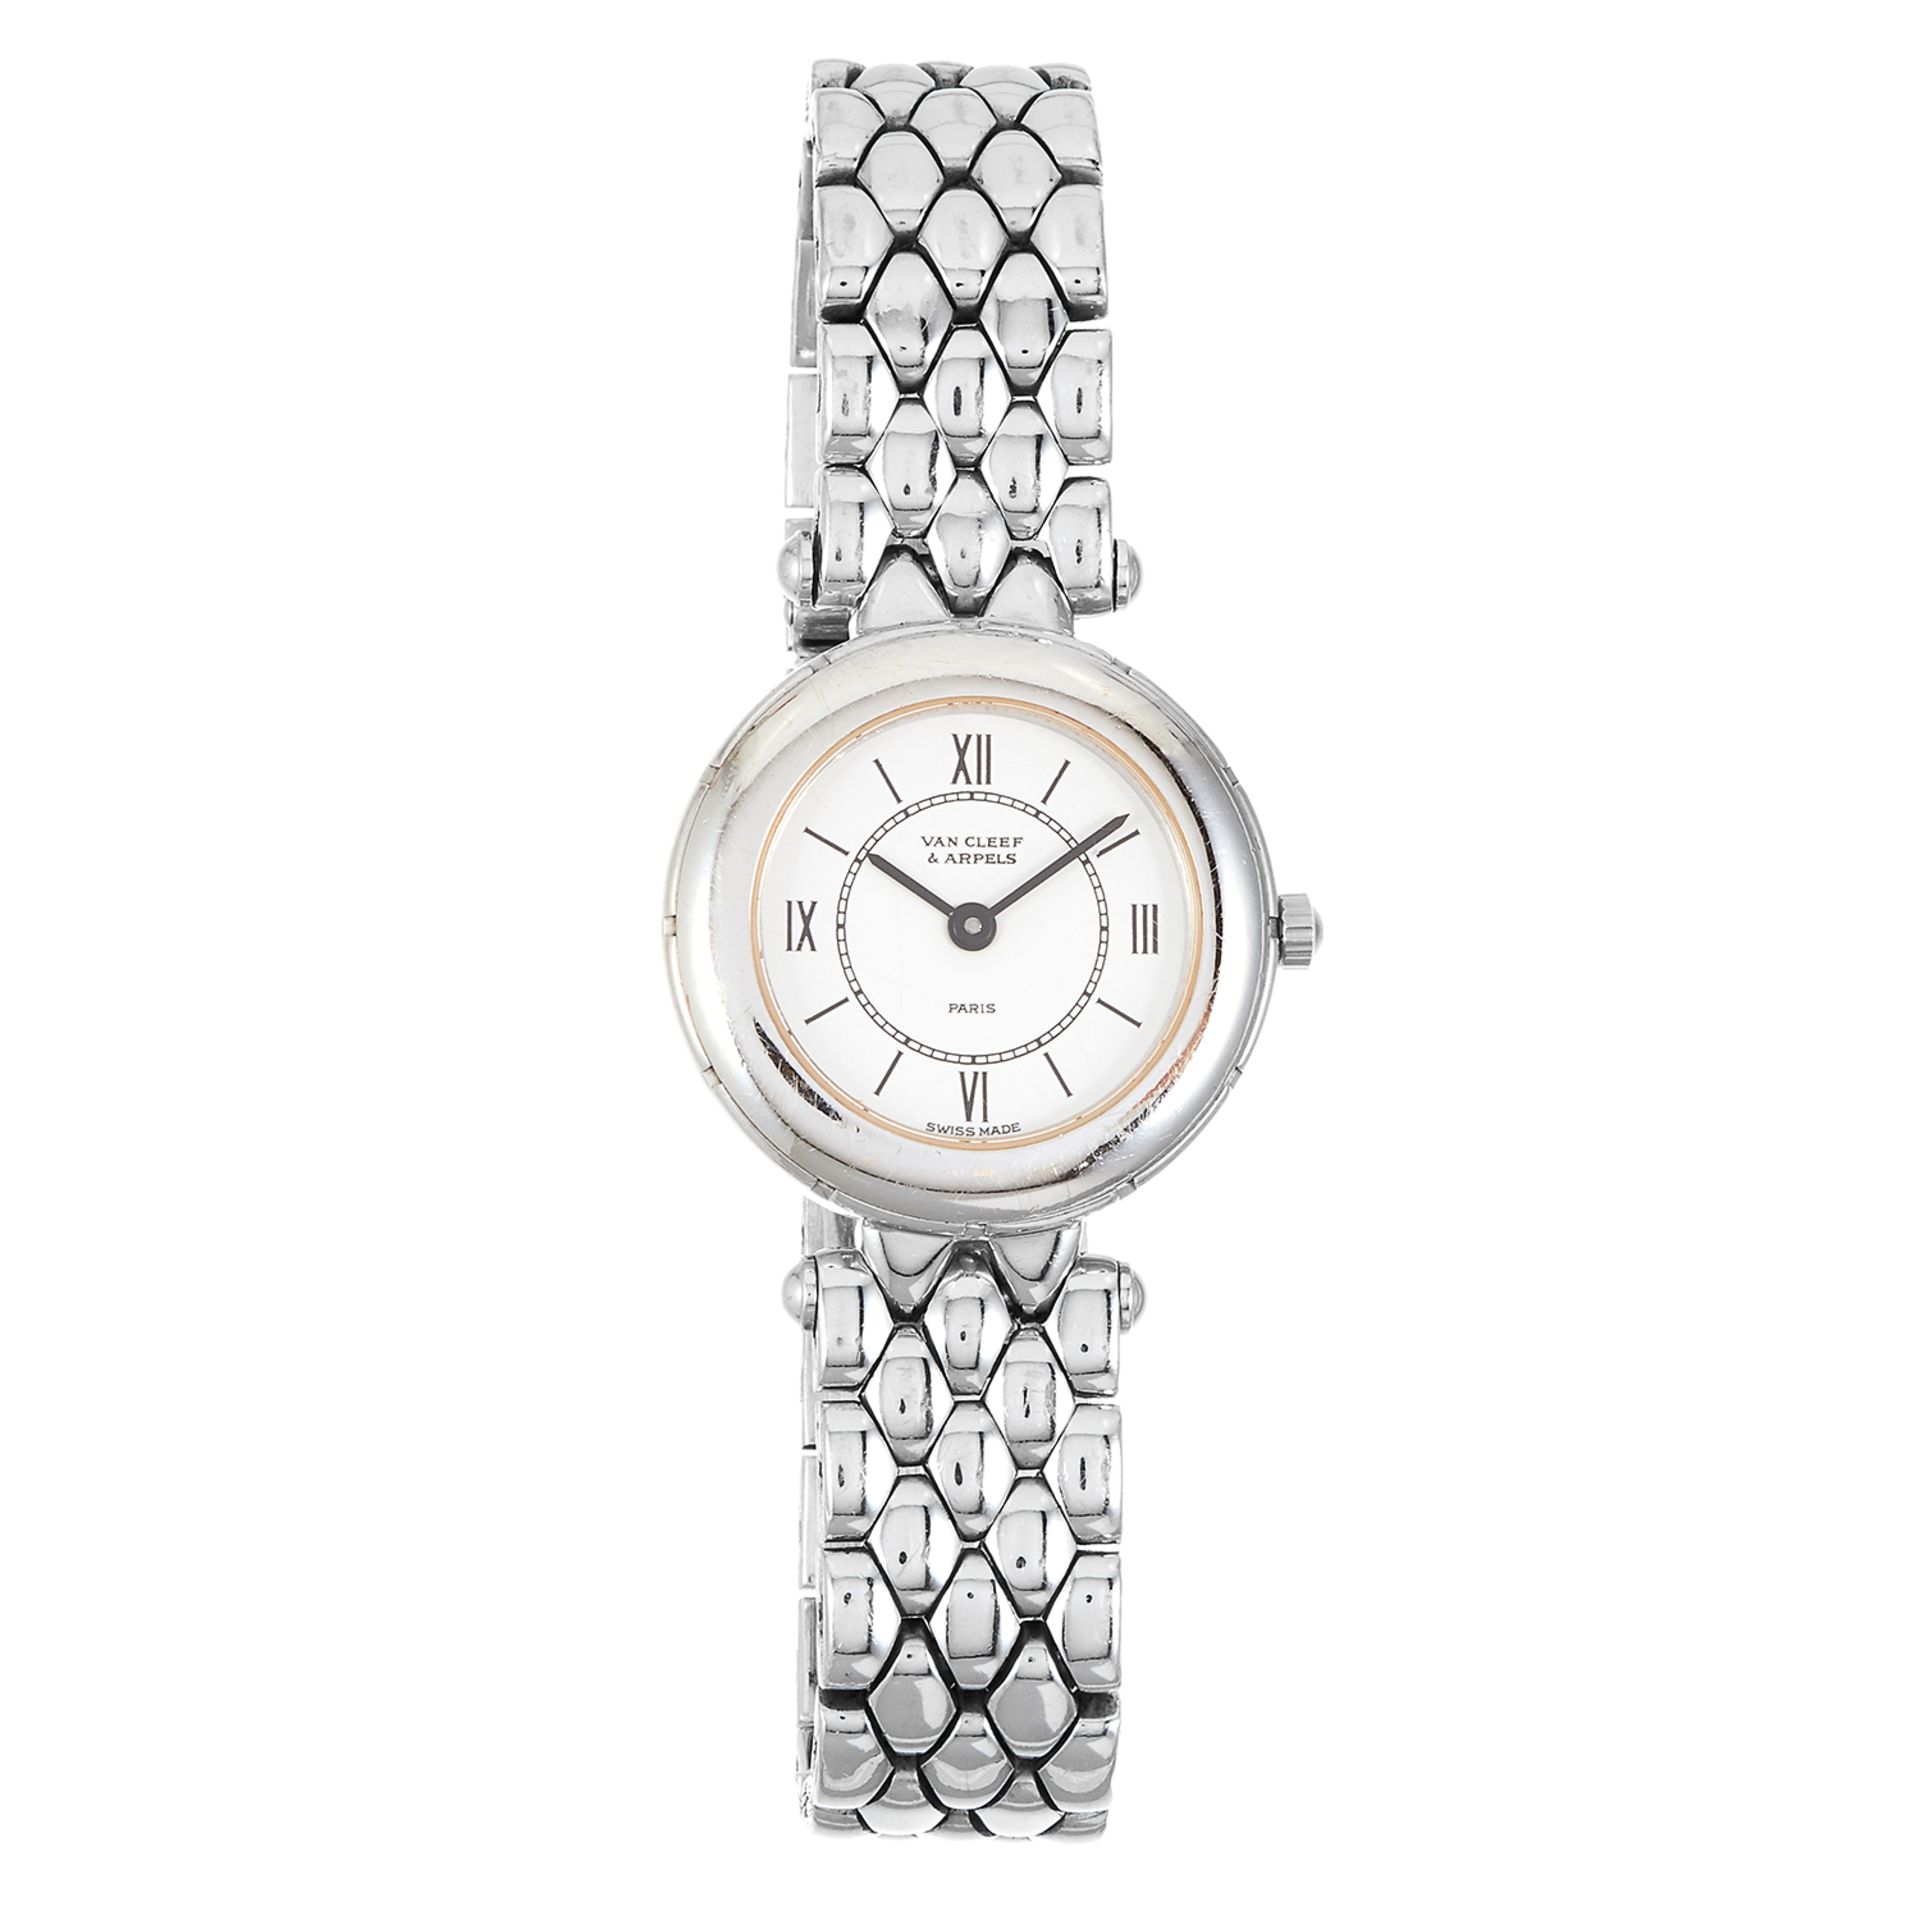 A LADIES WRIST WATCH, VAN CLEEF AND ARPELS in 18ct white gold, with white dial, signed Van Cleef and